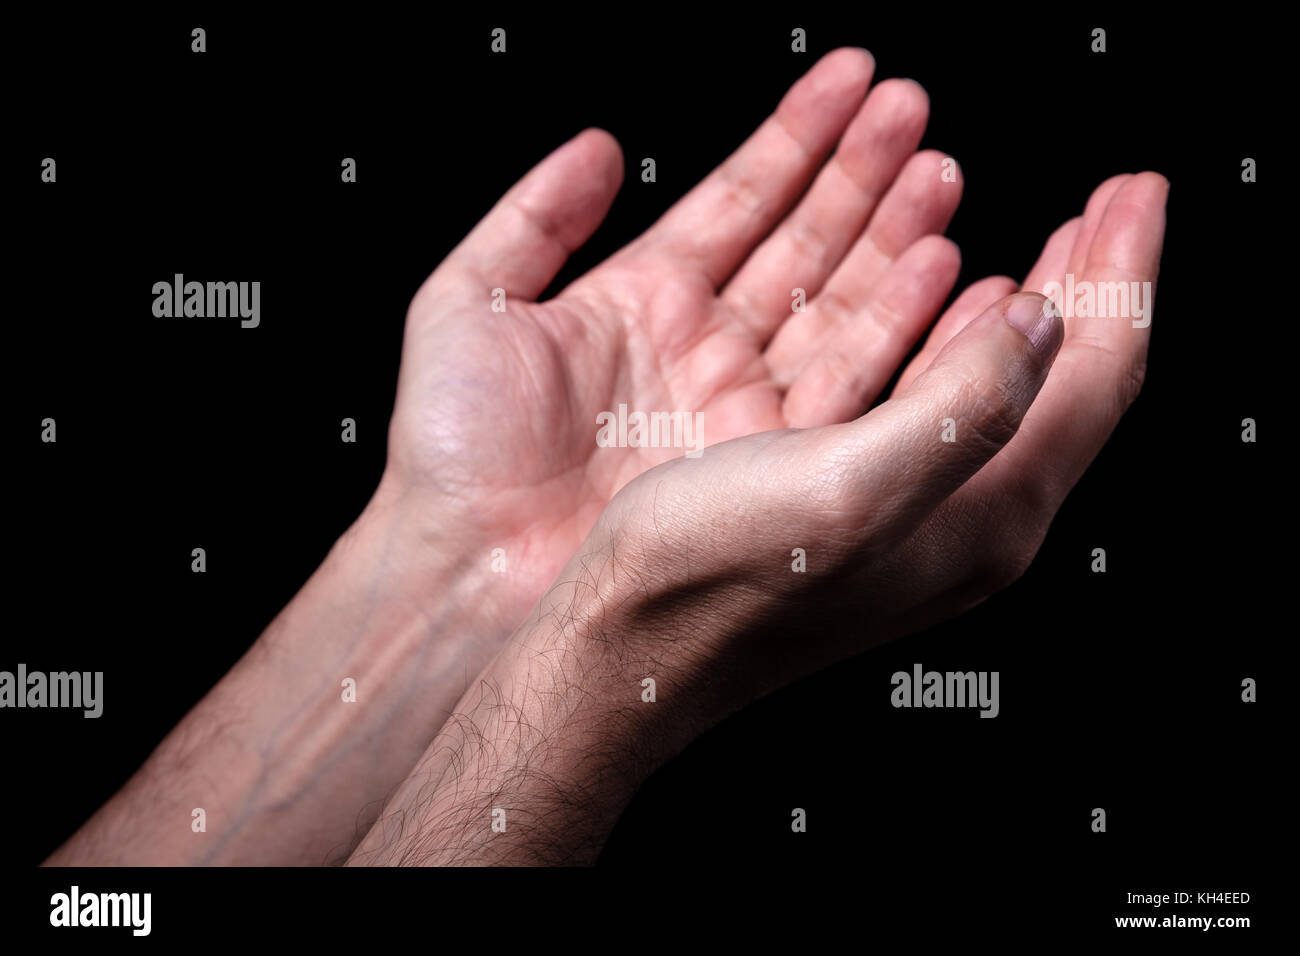 Male hands praying with palms up arms outstretched. Black background. Close up of man hand. Concept for prayer, faith, religion, religious, worship Stock Photo